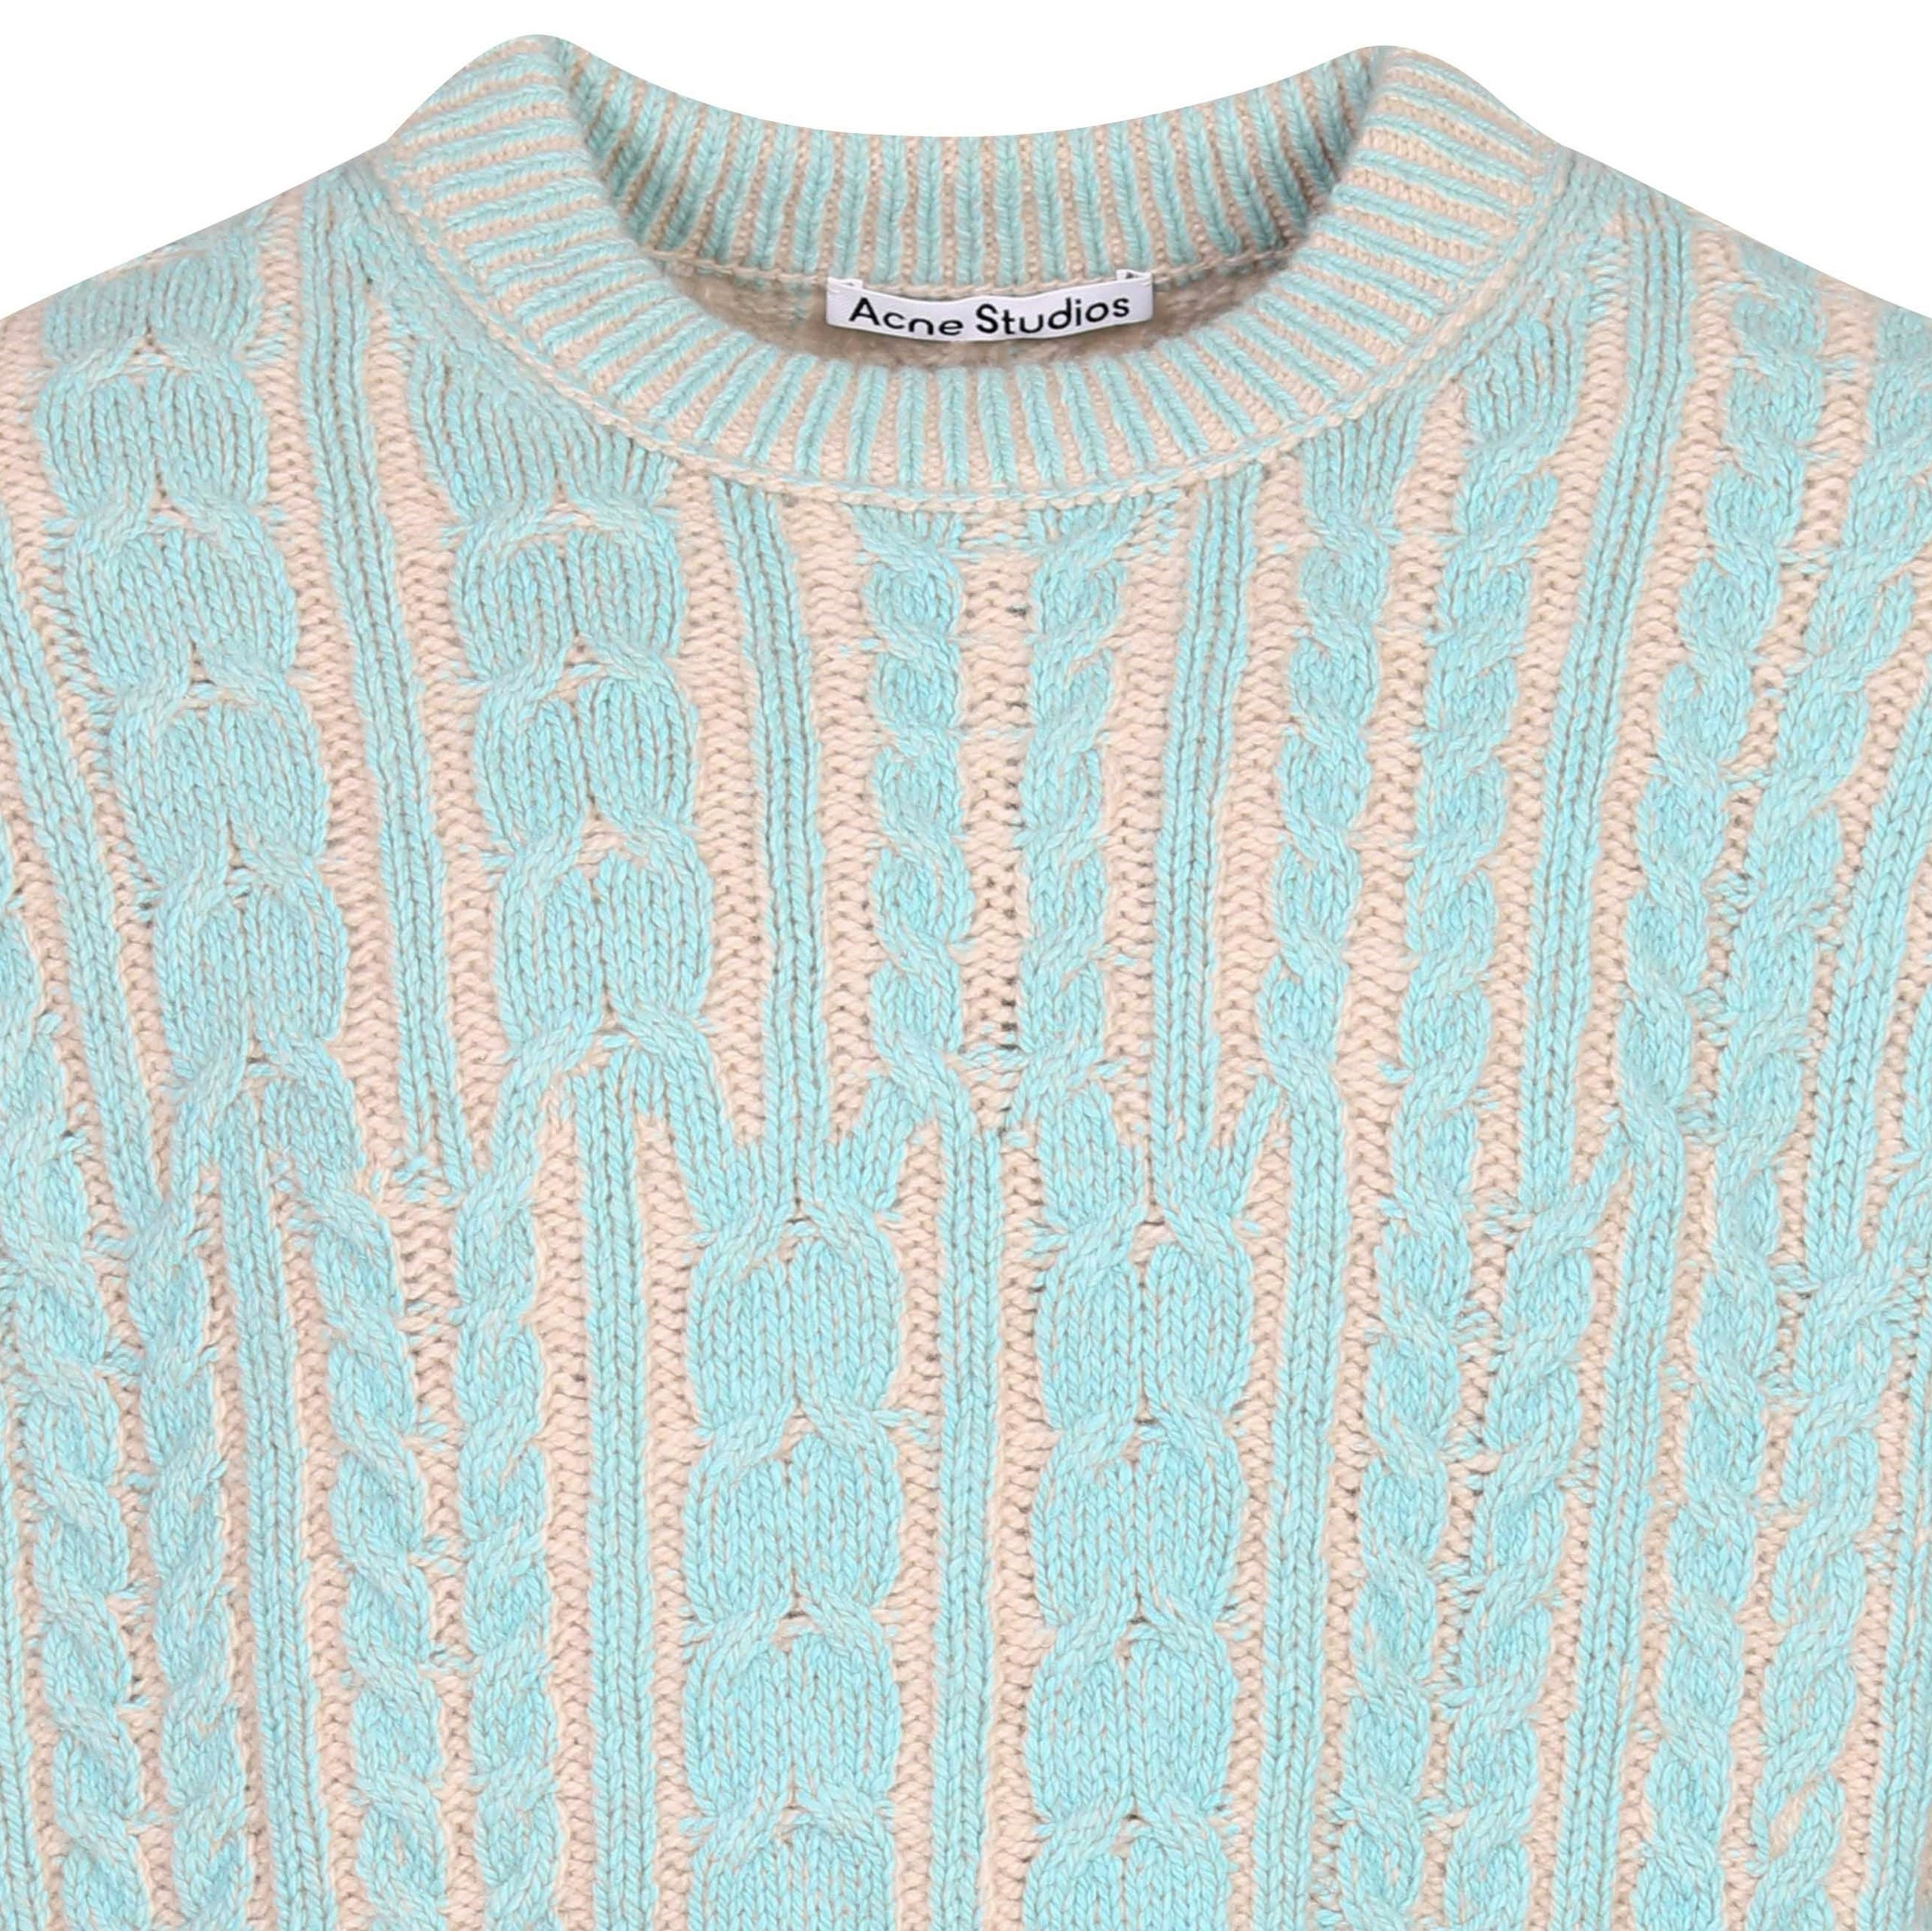 Acne Studios Knit Pullover in Turquoise Blue